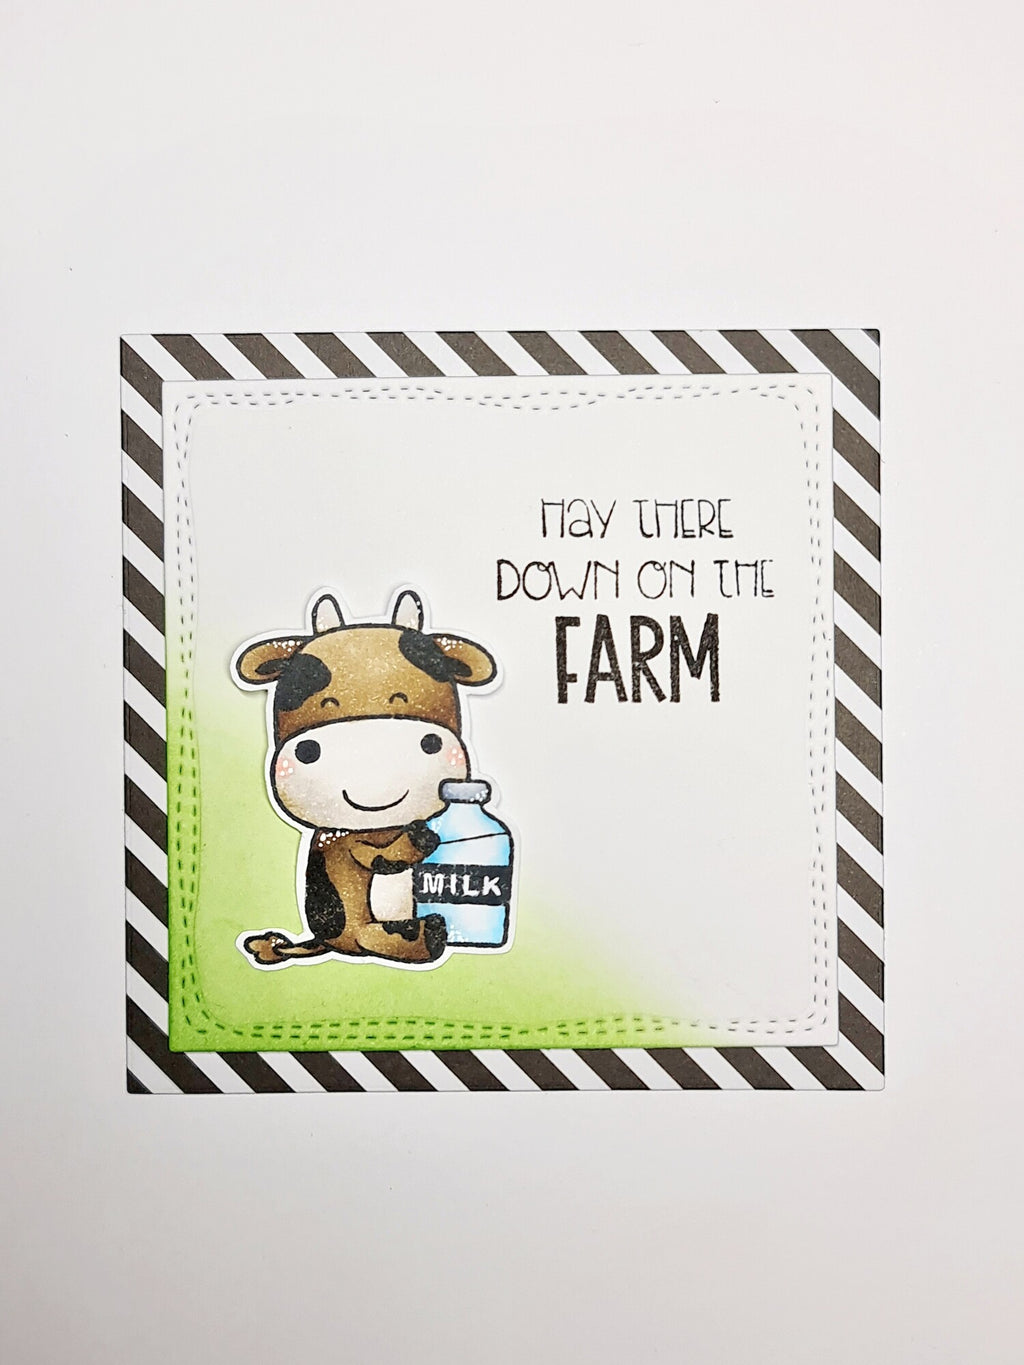 Studio Light - Creative Craftlab - Clear Stamp Set - A6 - Holy Cow